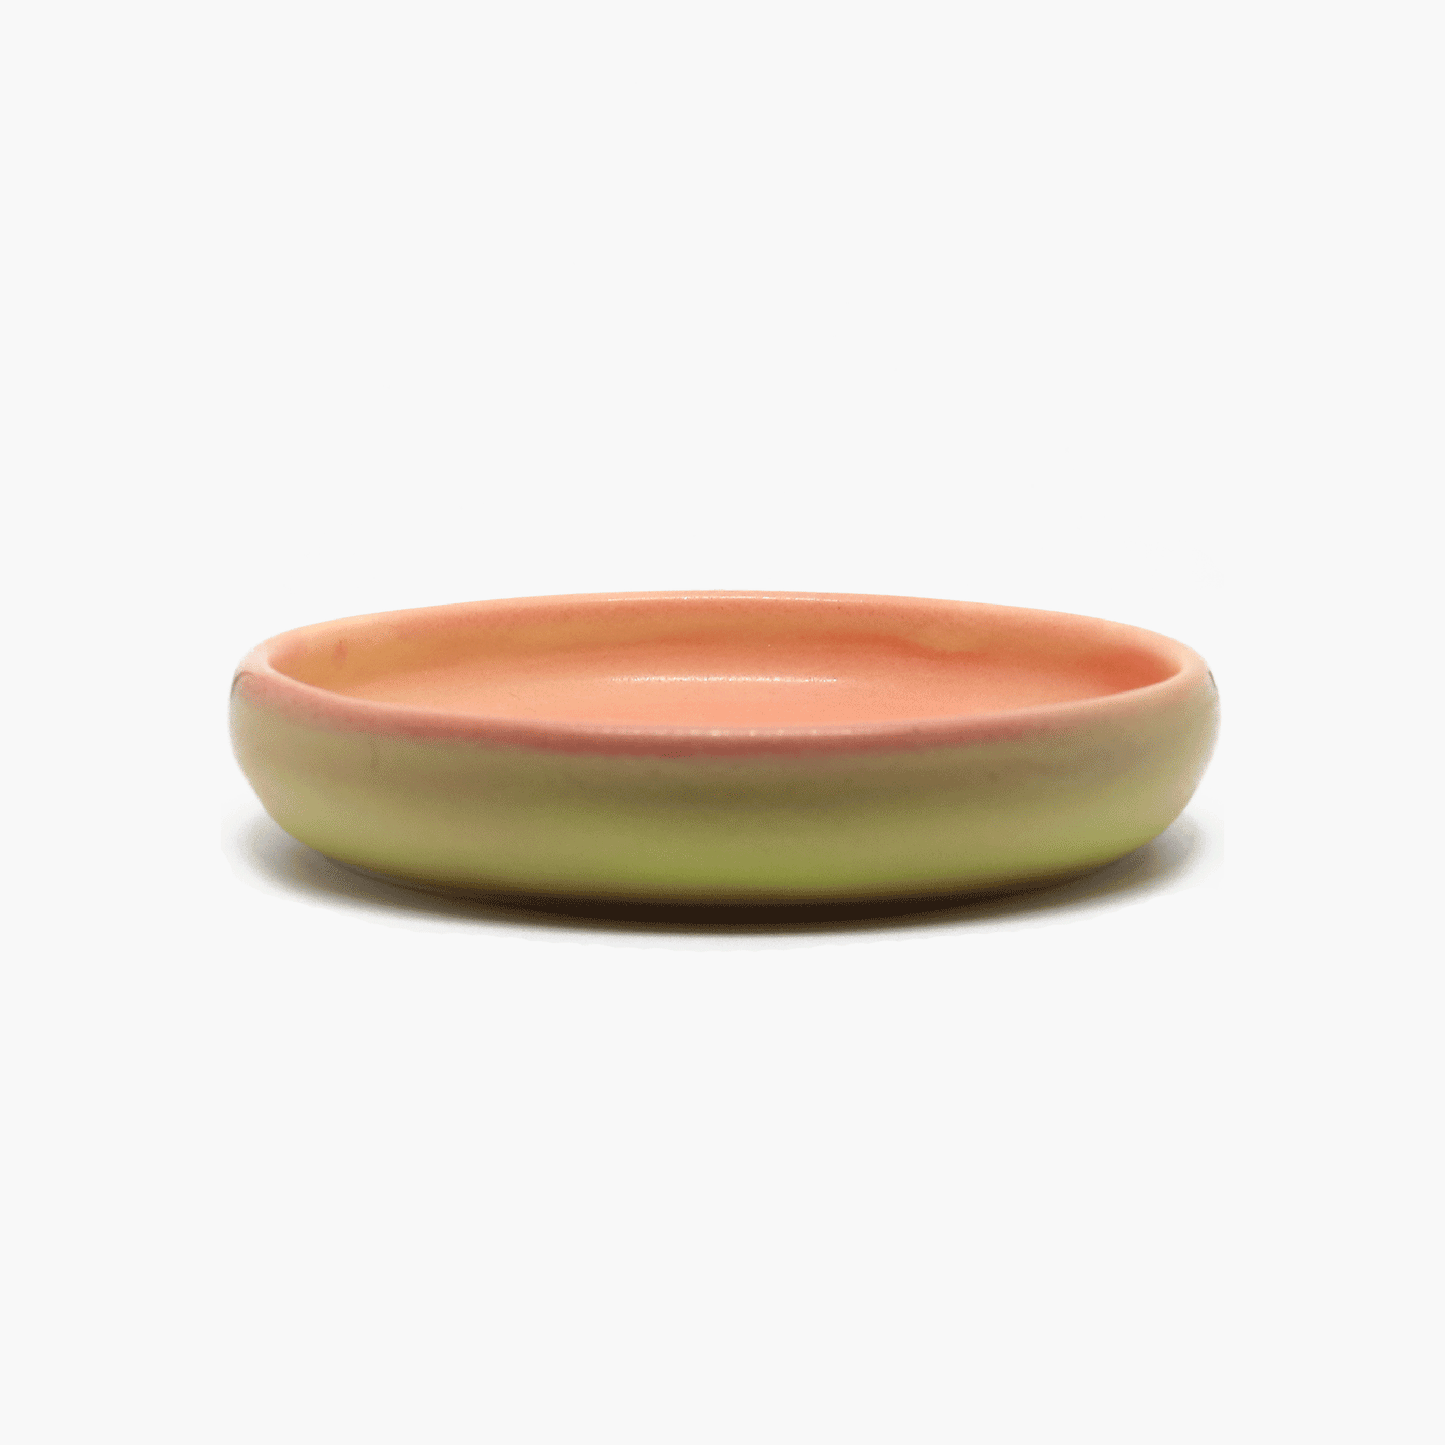 Bubble Valet Plate in Orangey and Yellow Semi-Porcelain